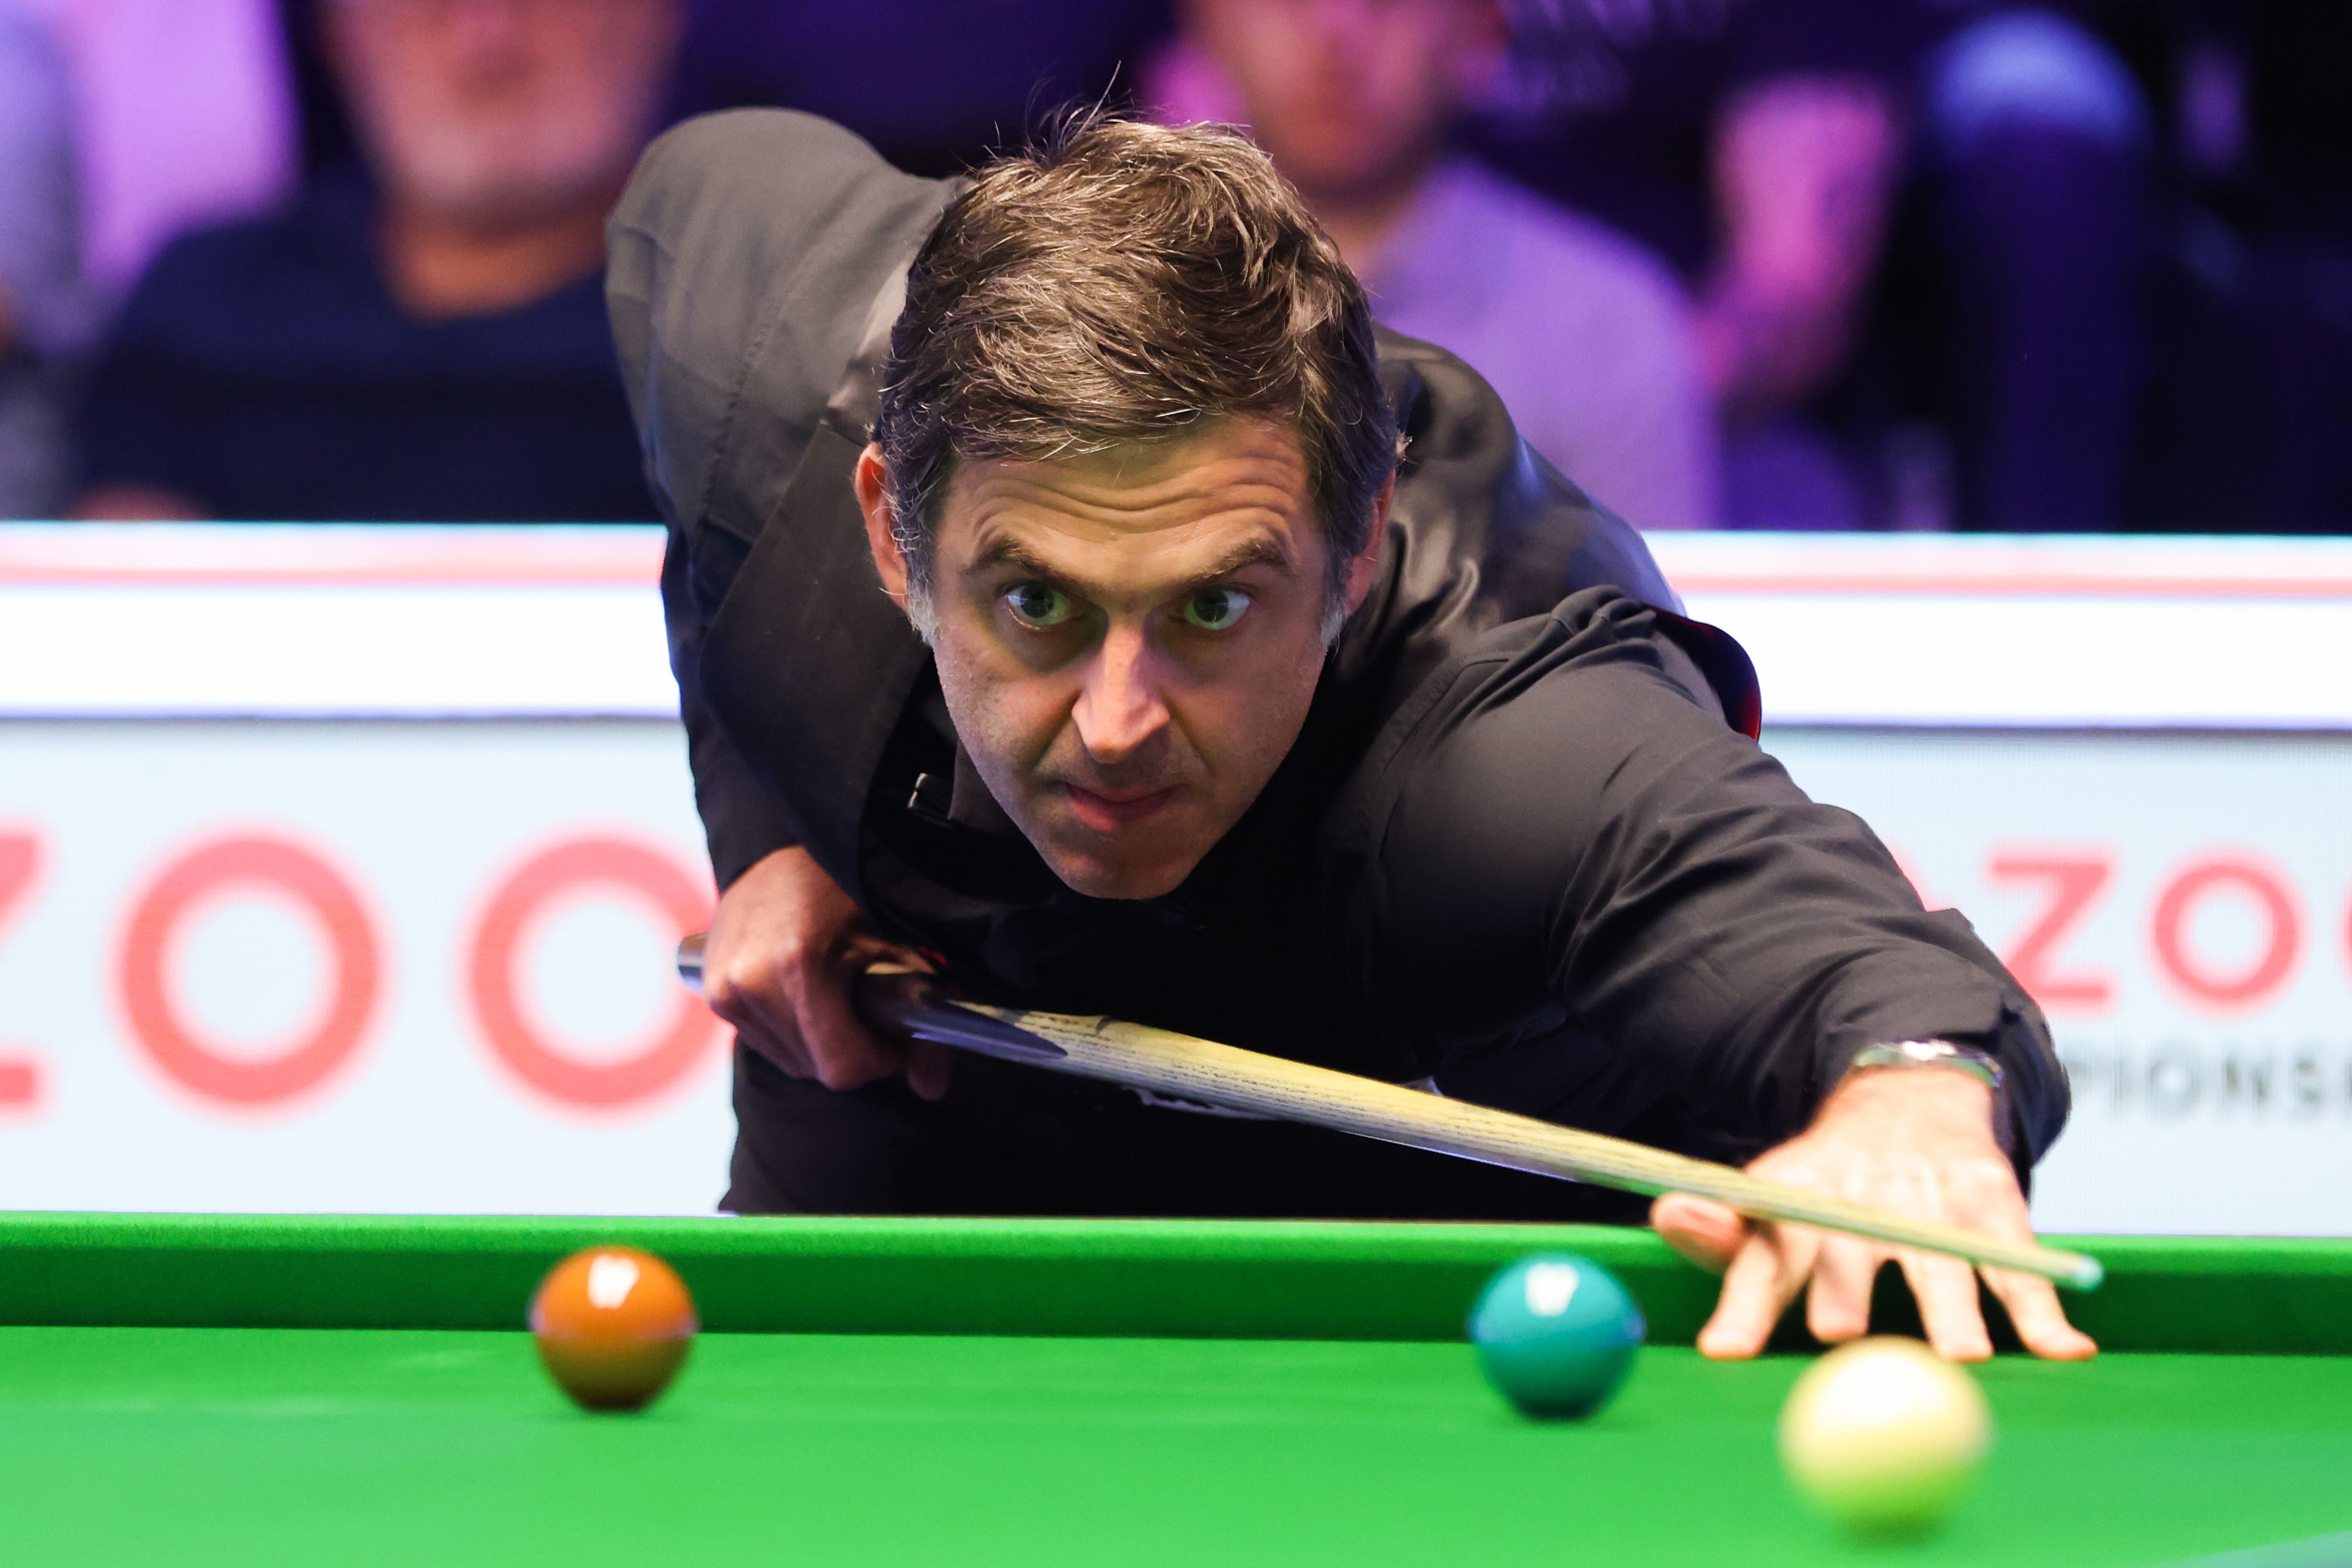 Ronnie OSullivan aims to keep controversy away during latest Crucible title bid The Independent